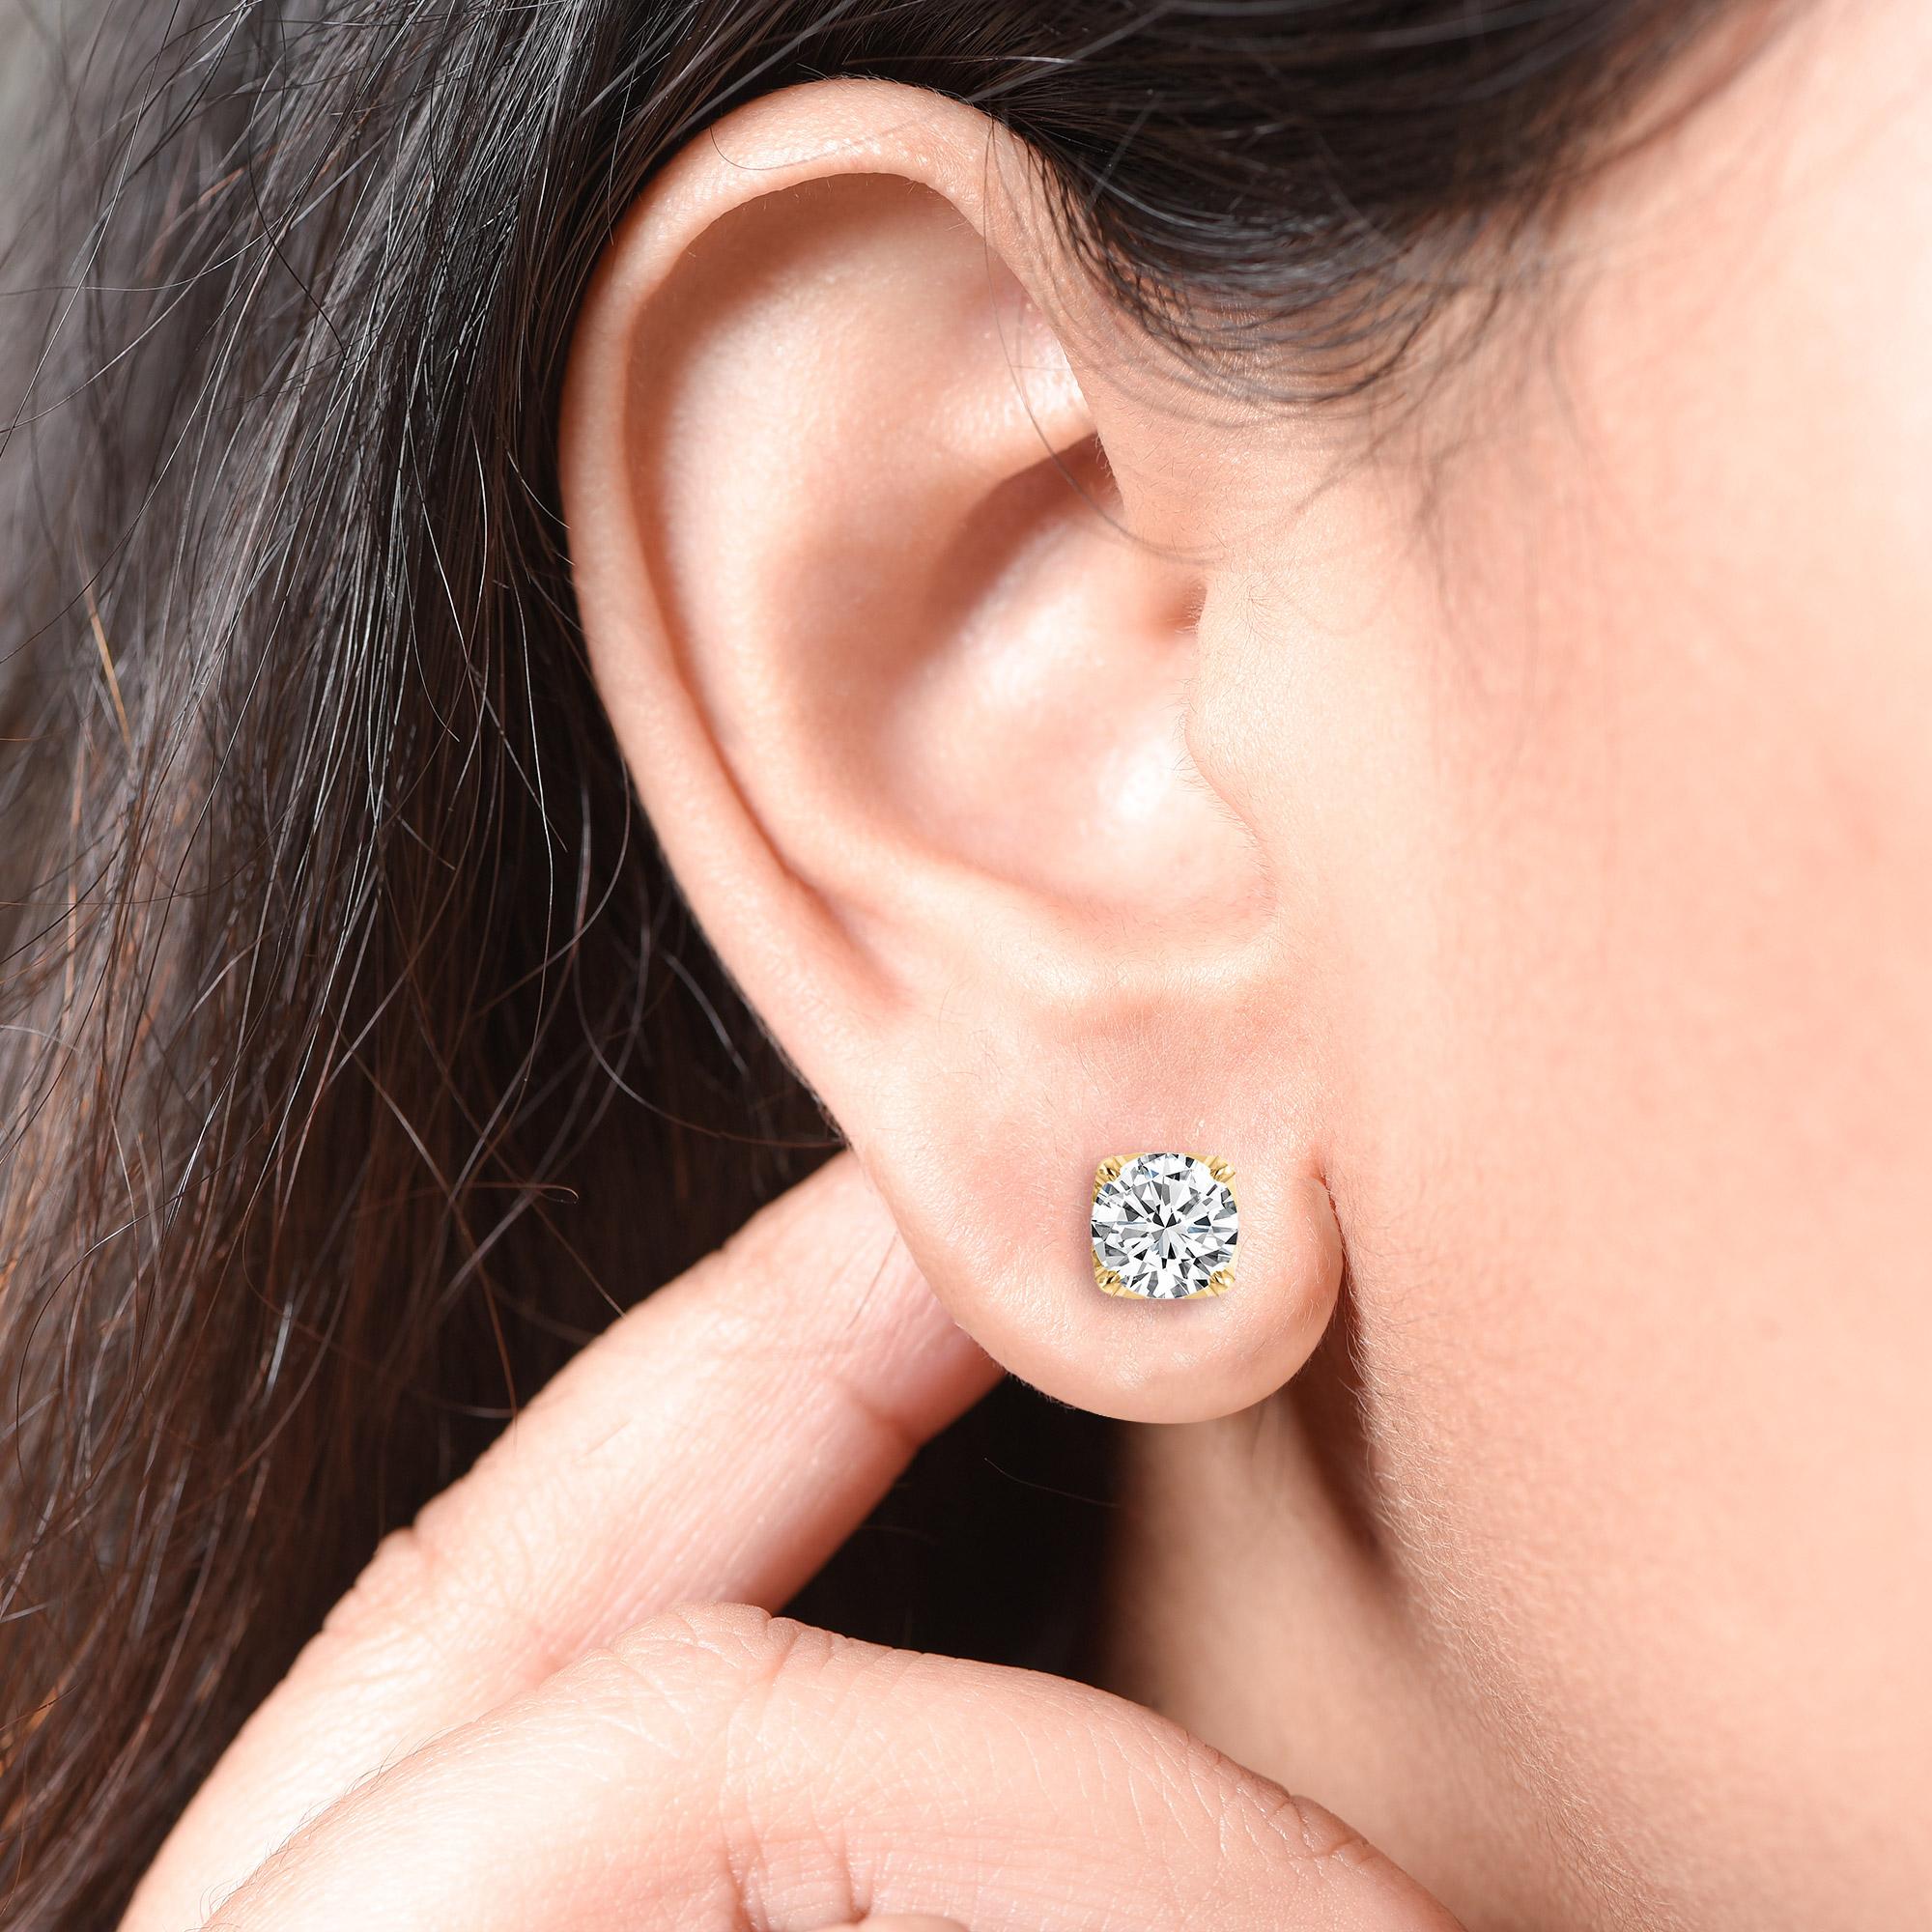 These GIA certified classic diamond studs showcase a pair of perfectly matched diamonds weighing total 1.25 carat. Crafted in 18-karat yellow gold, these four prong earrings are available in rose and white gold as well.

Perfect for gifting and for